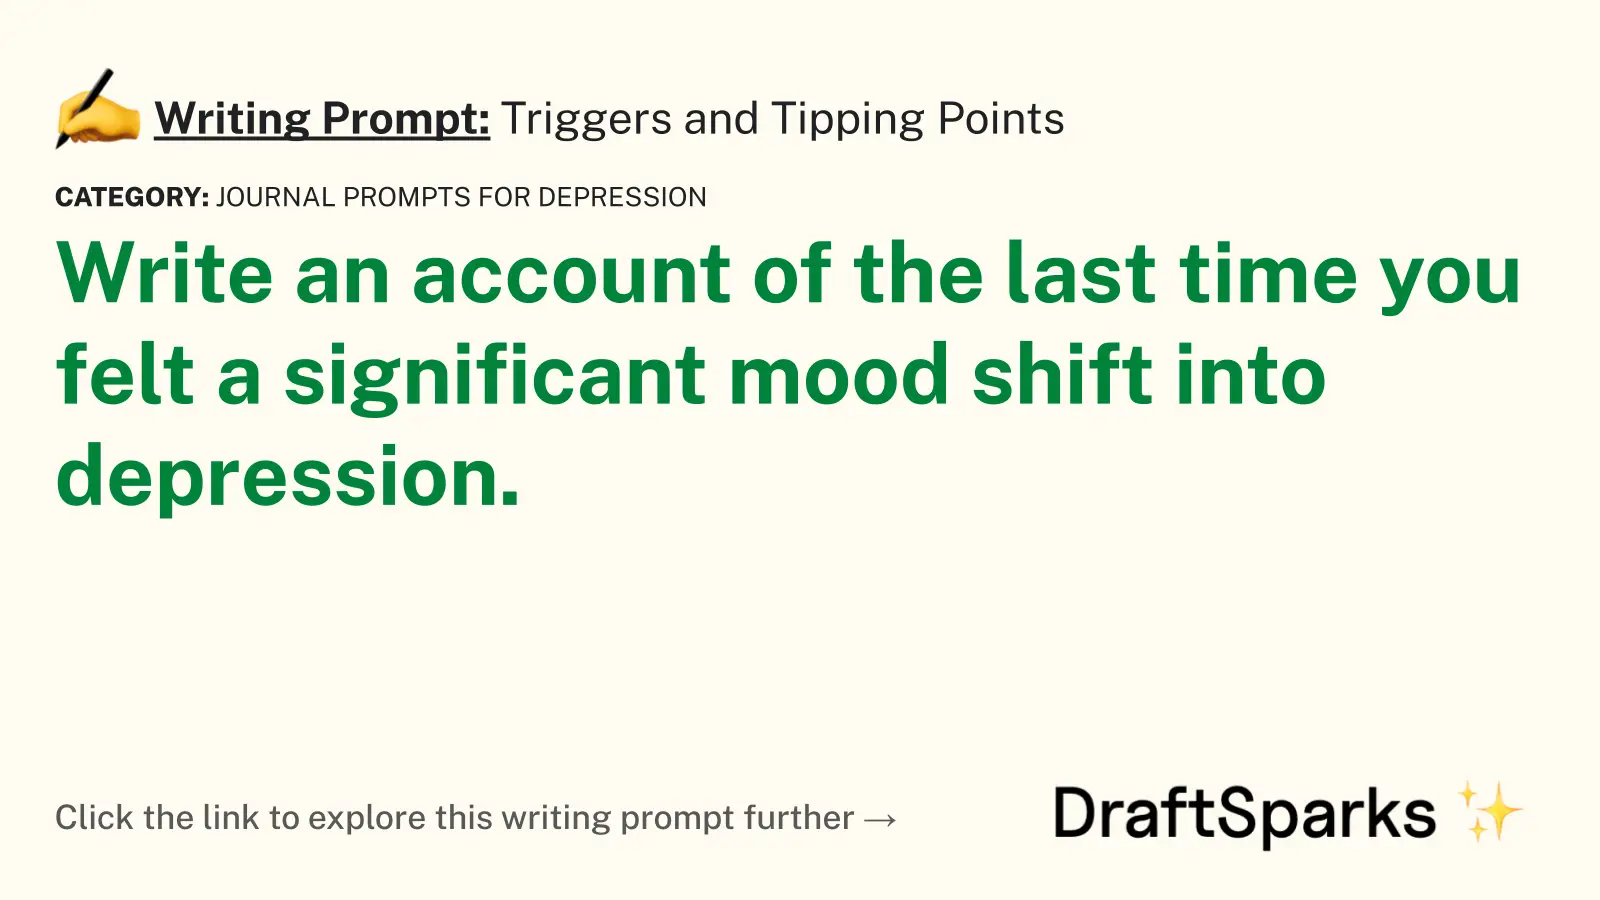 Triggers and Tipping Points